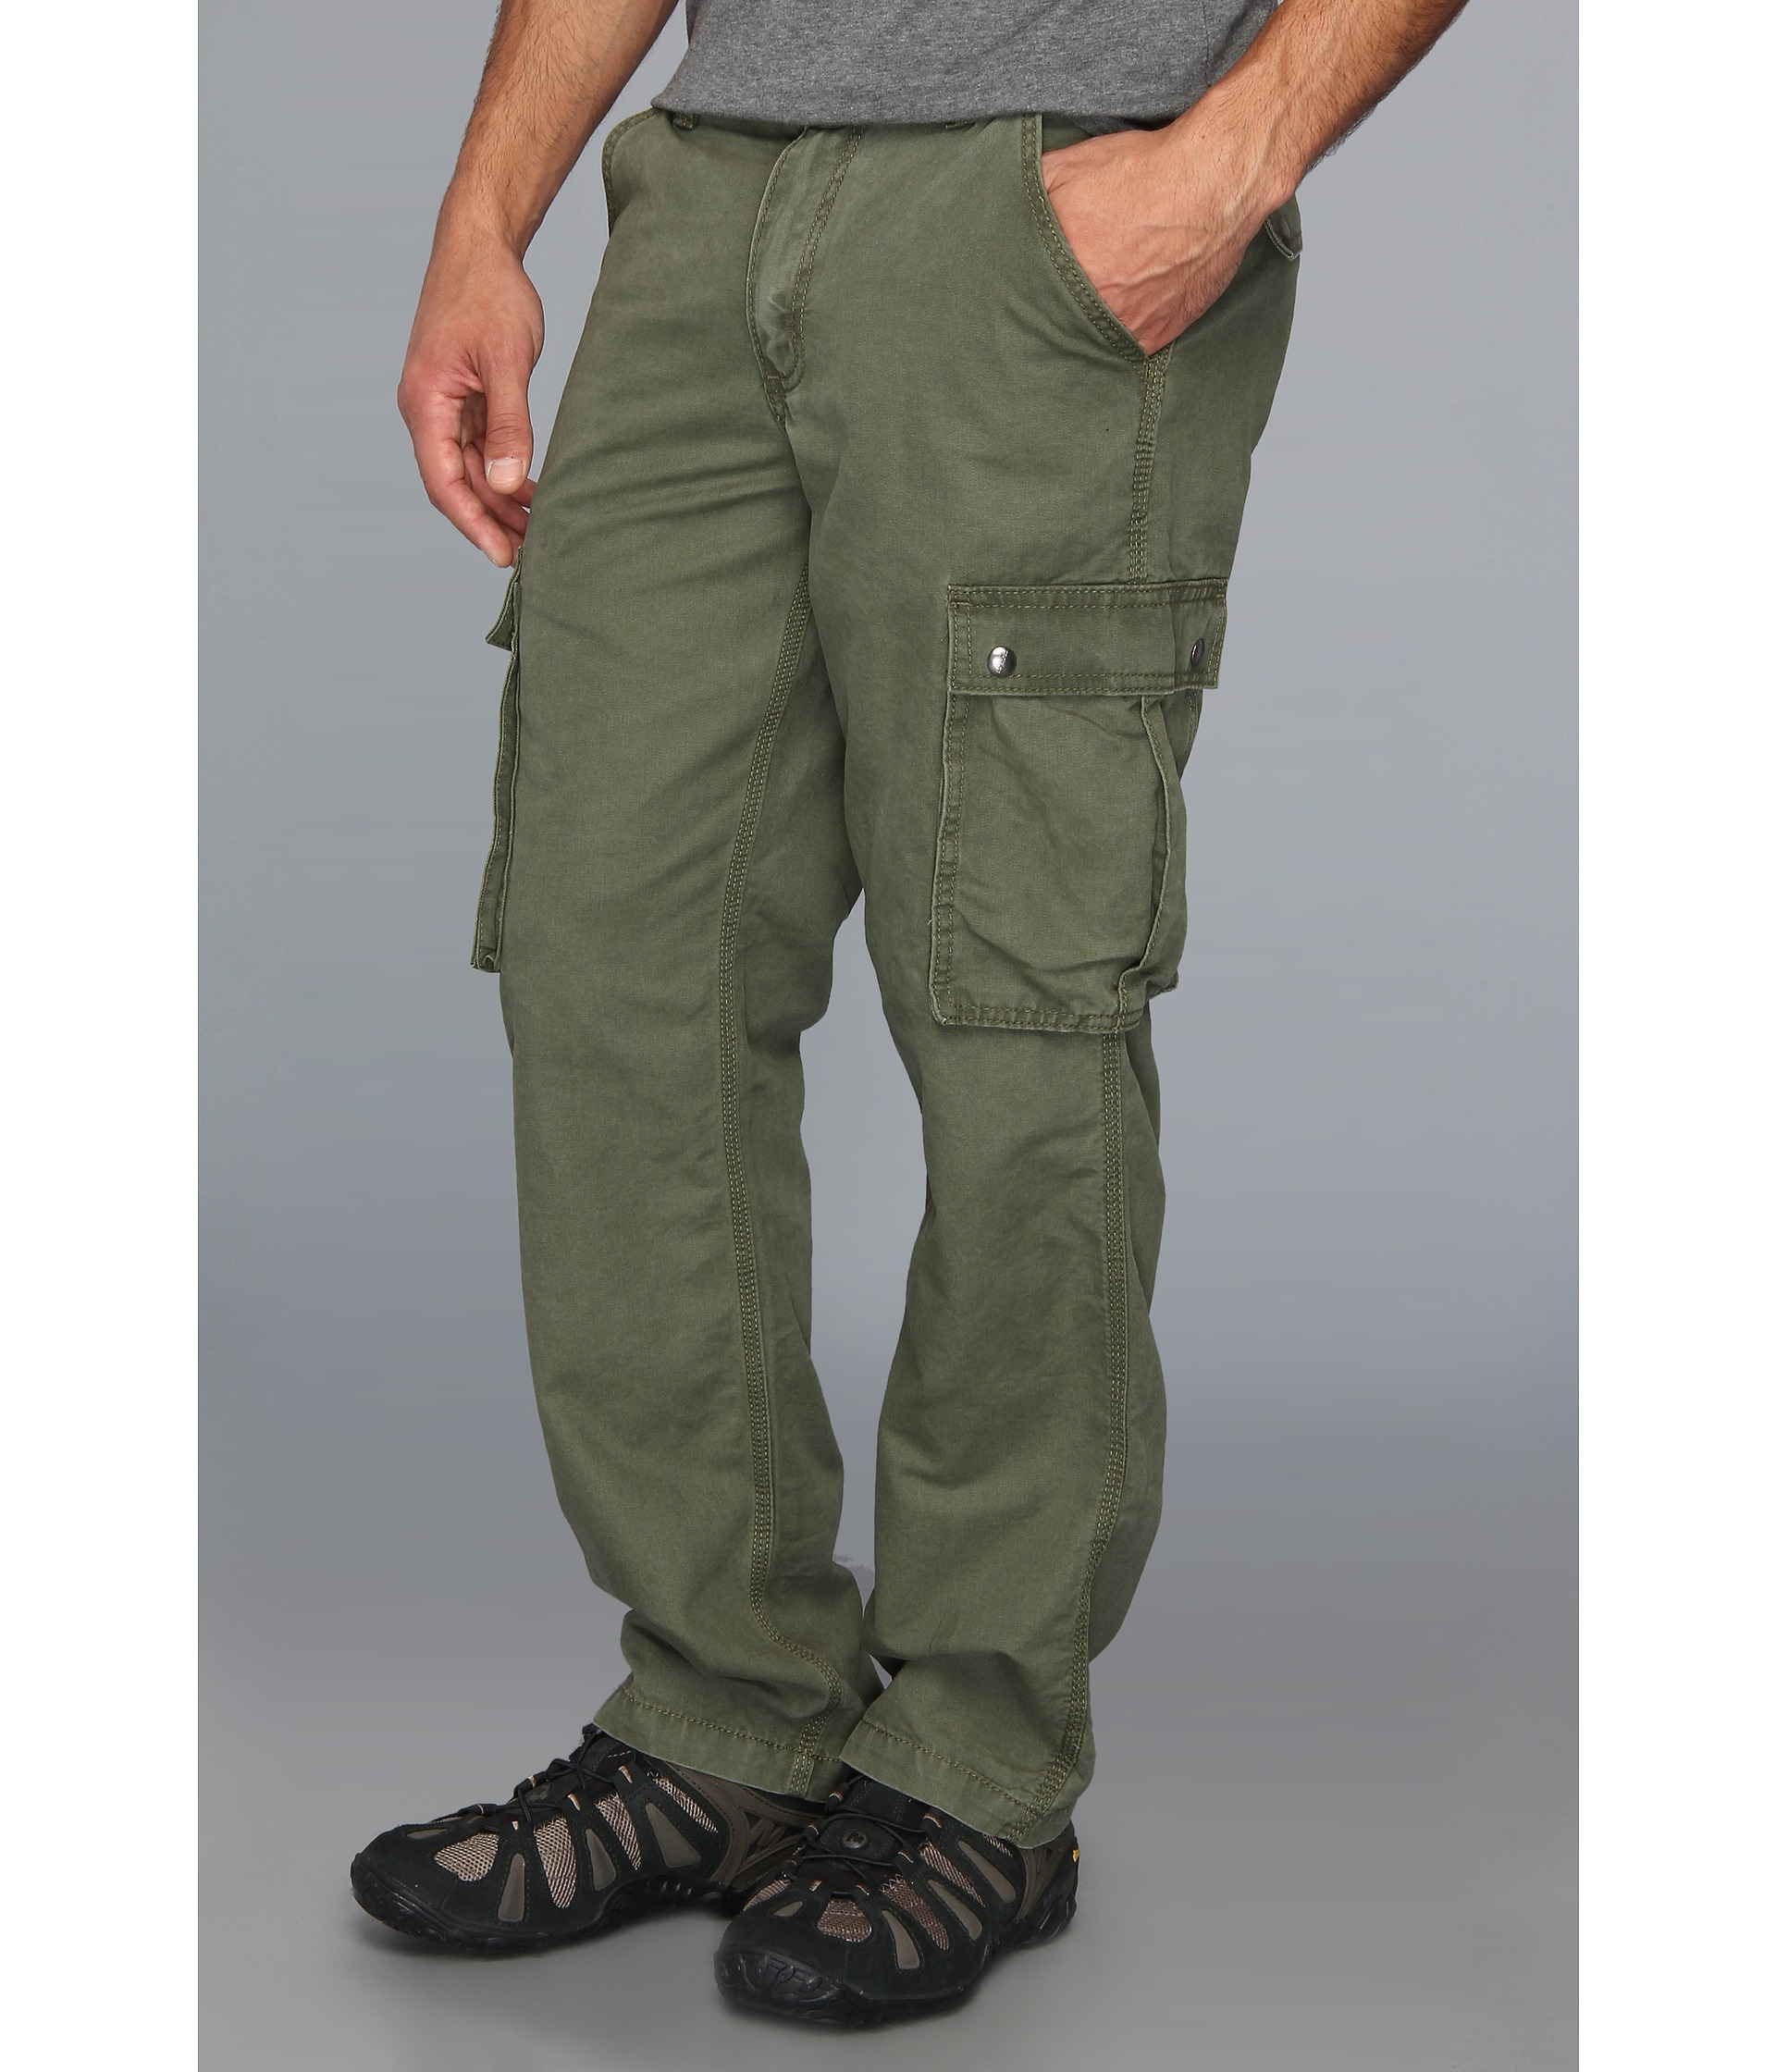 Carhartt Canvas Rugged Cargo Pant in Army Green (Green) for Men - Lyst